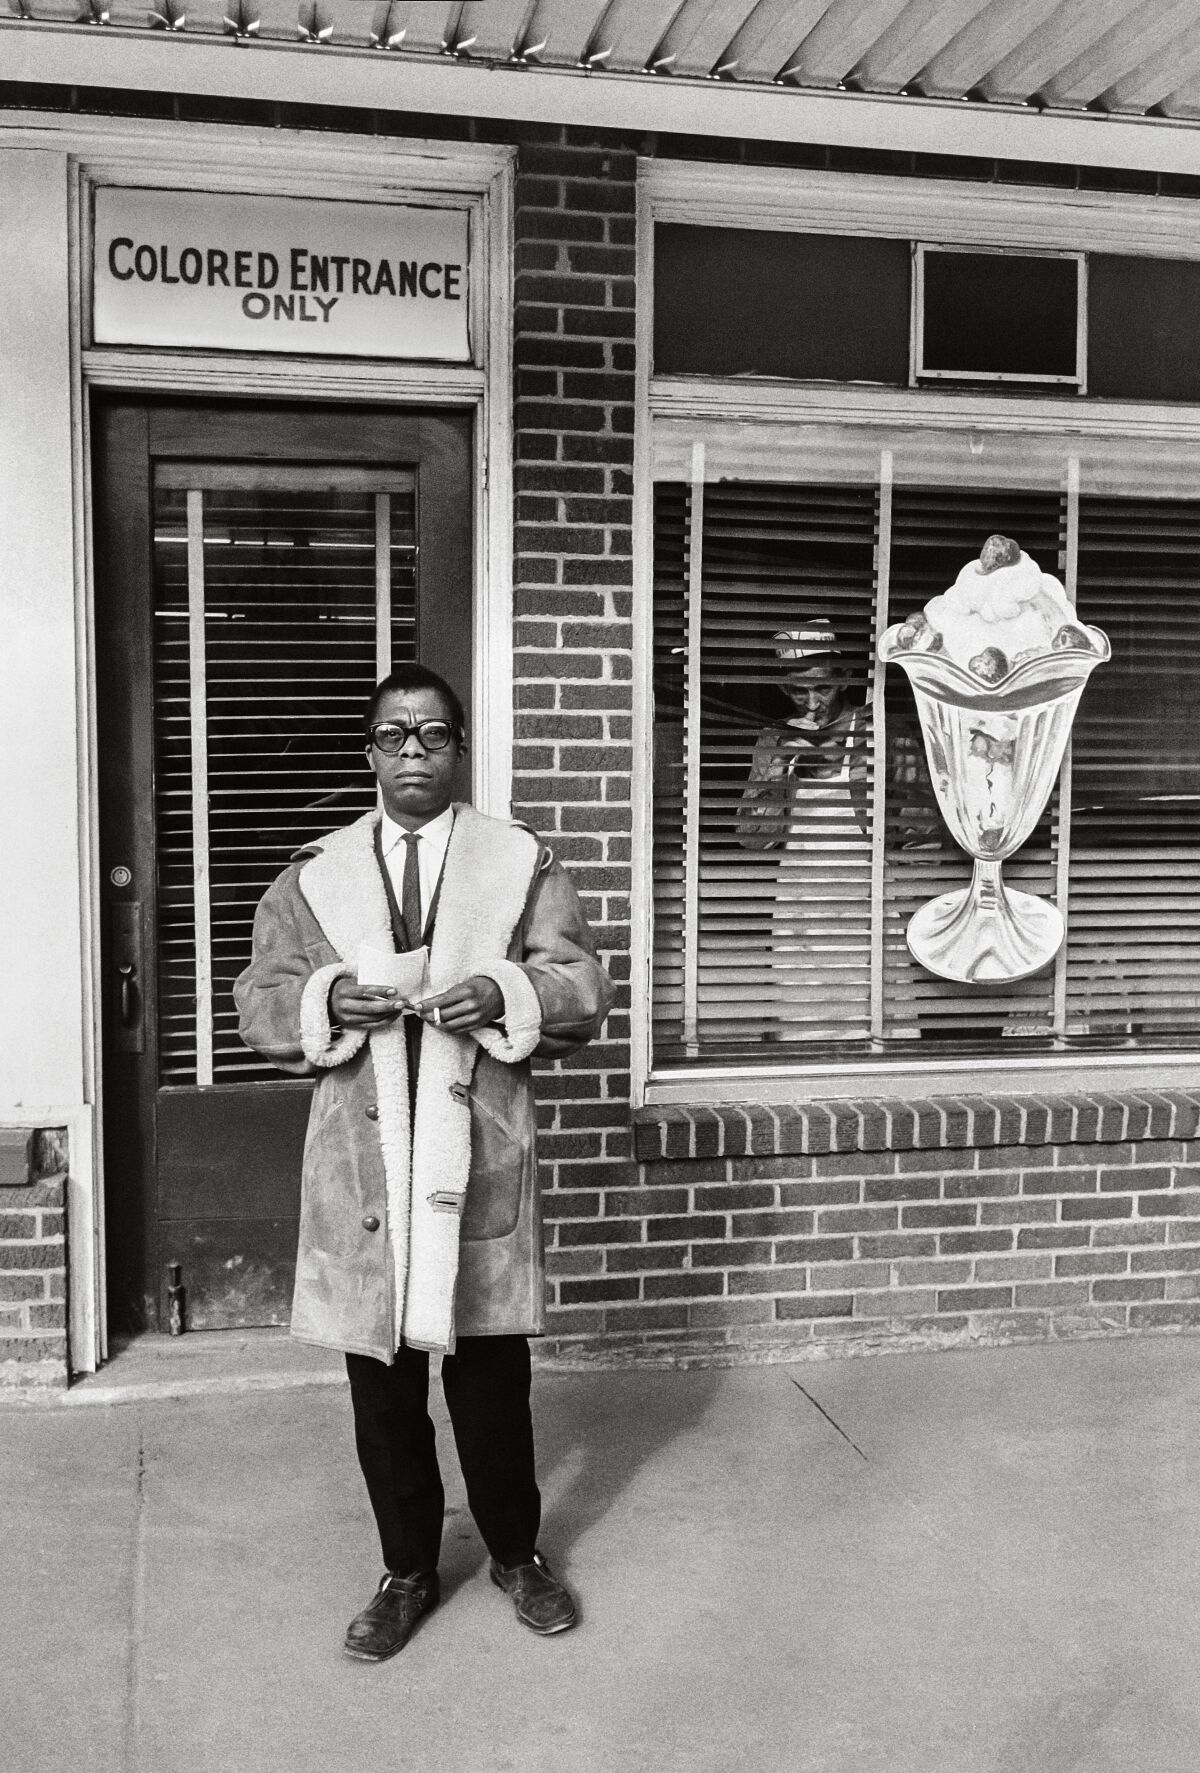 A man in a coat stands in front of an ice cream shop and a sign that reads, "Colored entrance only."